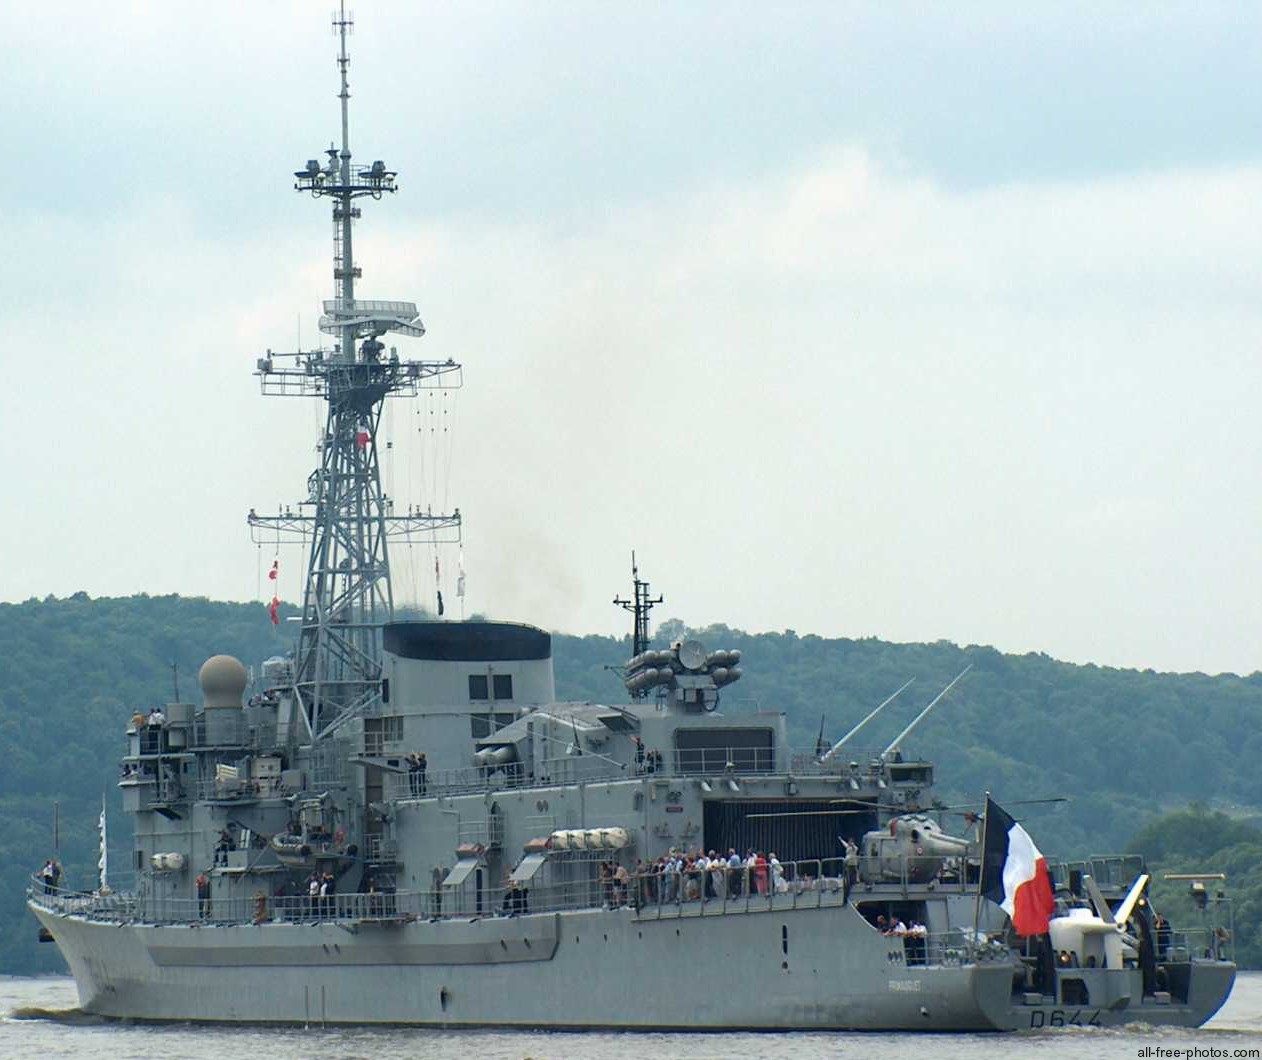 d-644 fs primauguet frigate destroyer asw type f70as leygues class french navy marine nationale 15